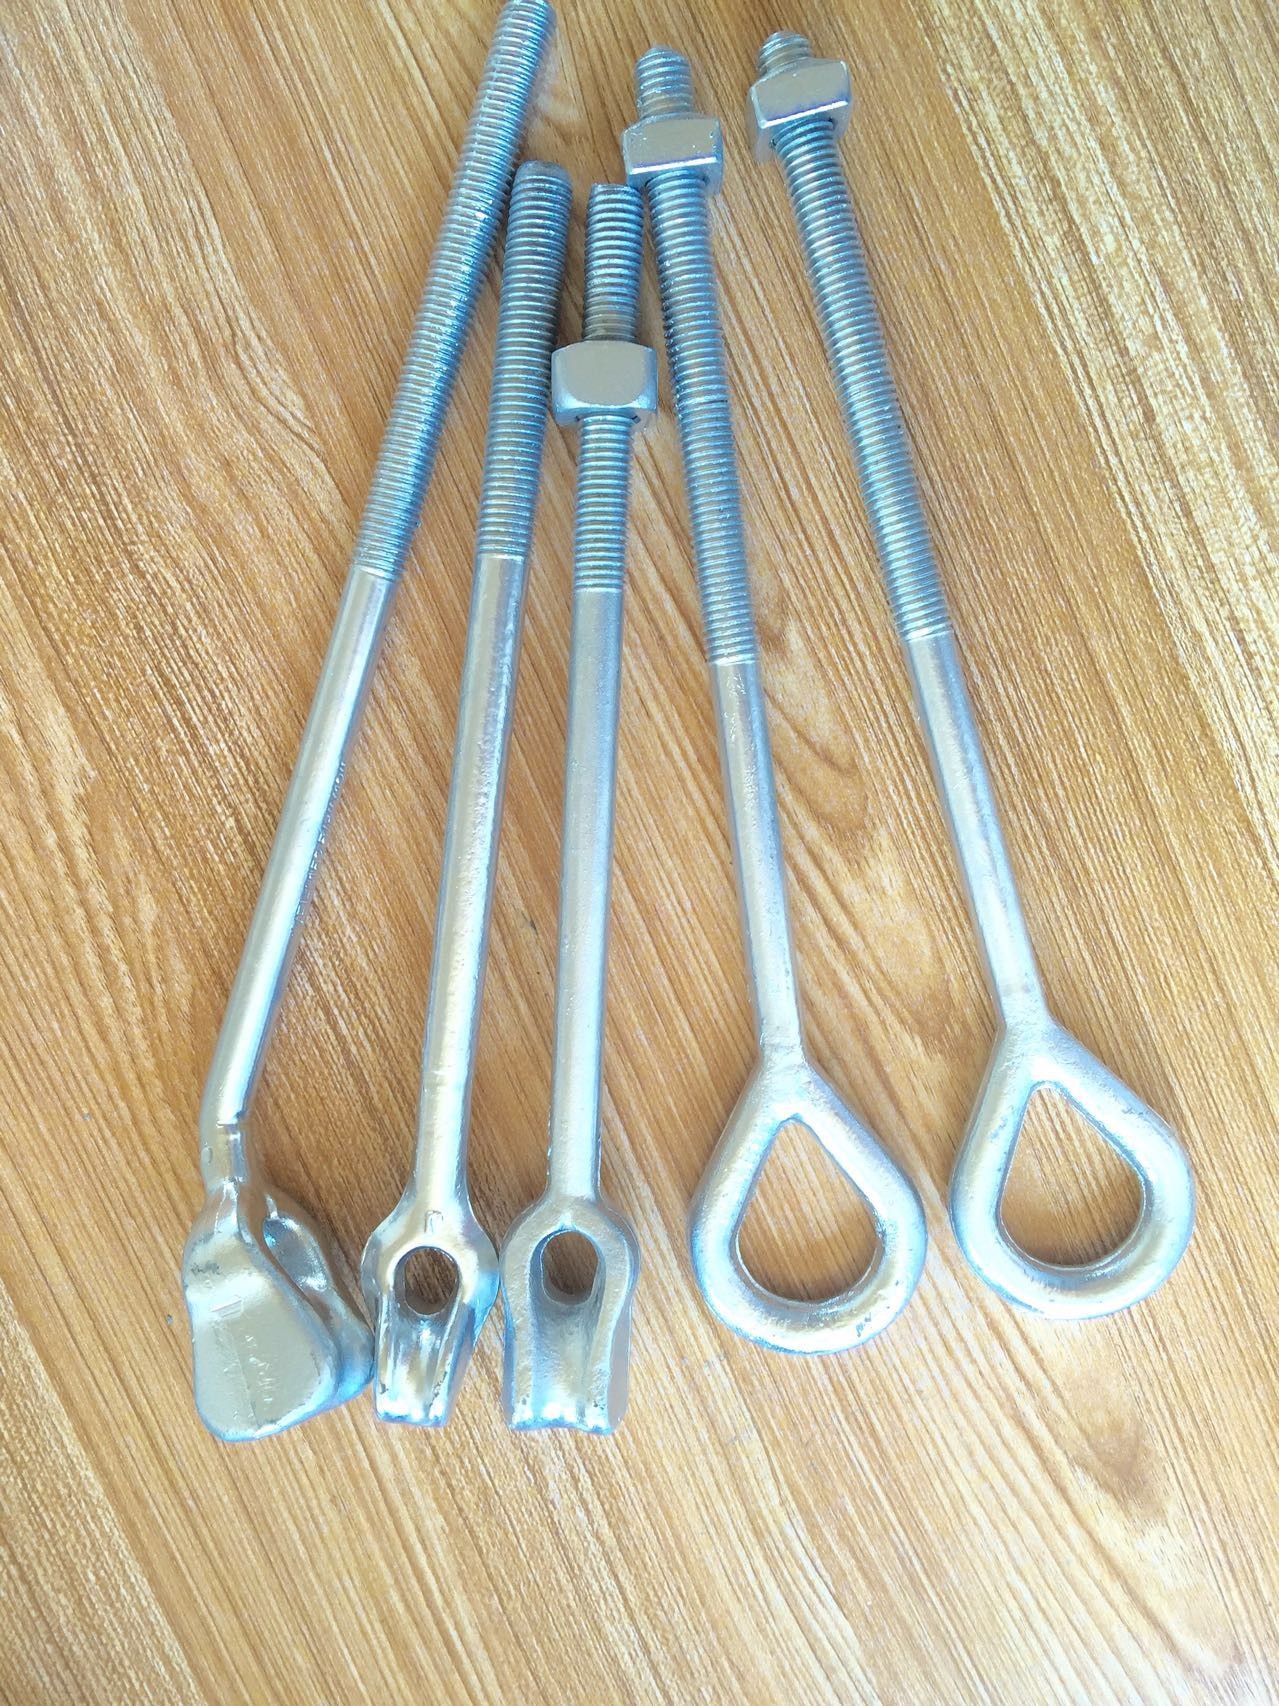 China forged straight eye guy strand  thimble eye anchor rods for power line fittings factory